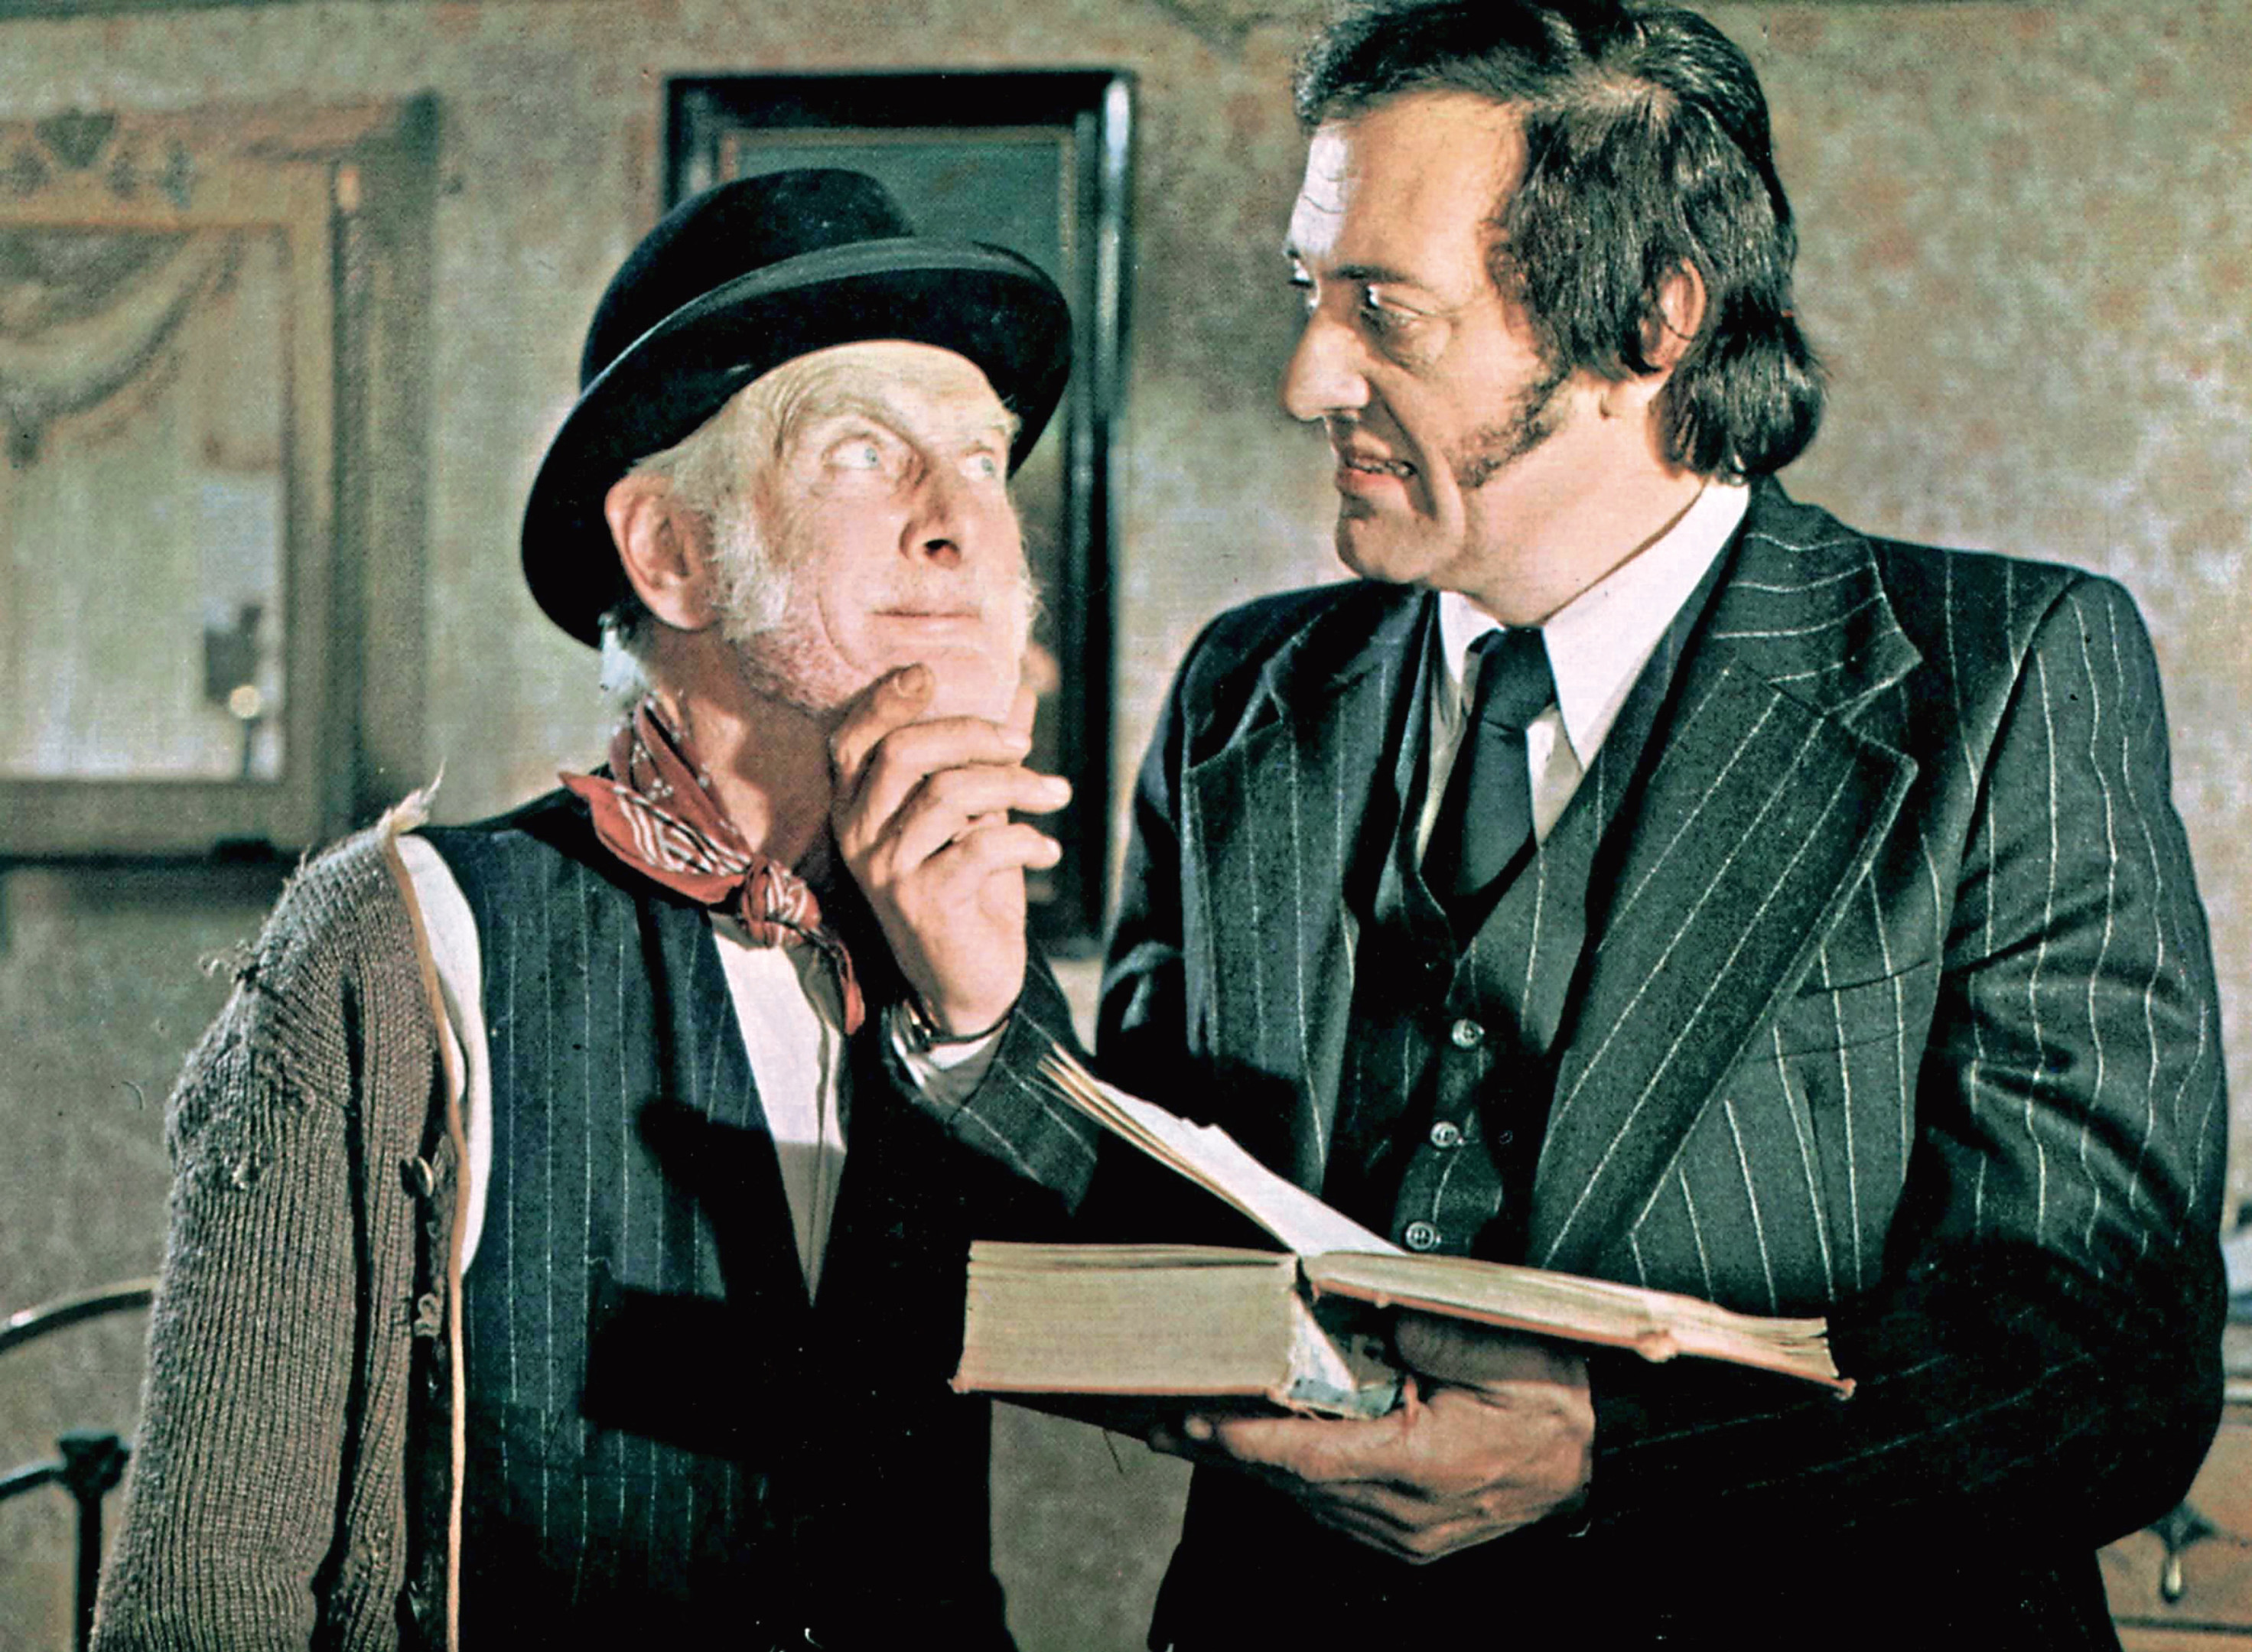 Steptoe And Son set the tone for the humour laced with realism (Allstar / ASSOCIATED LONDON FILMS / STUDIOCANAL)